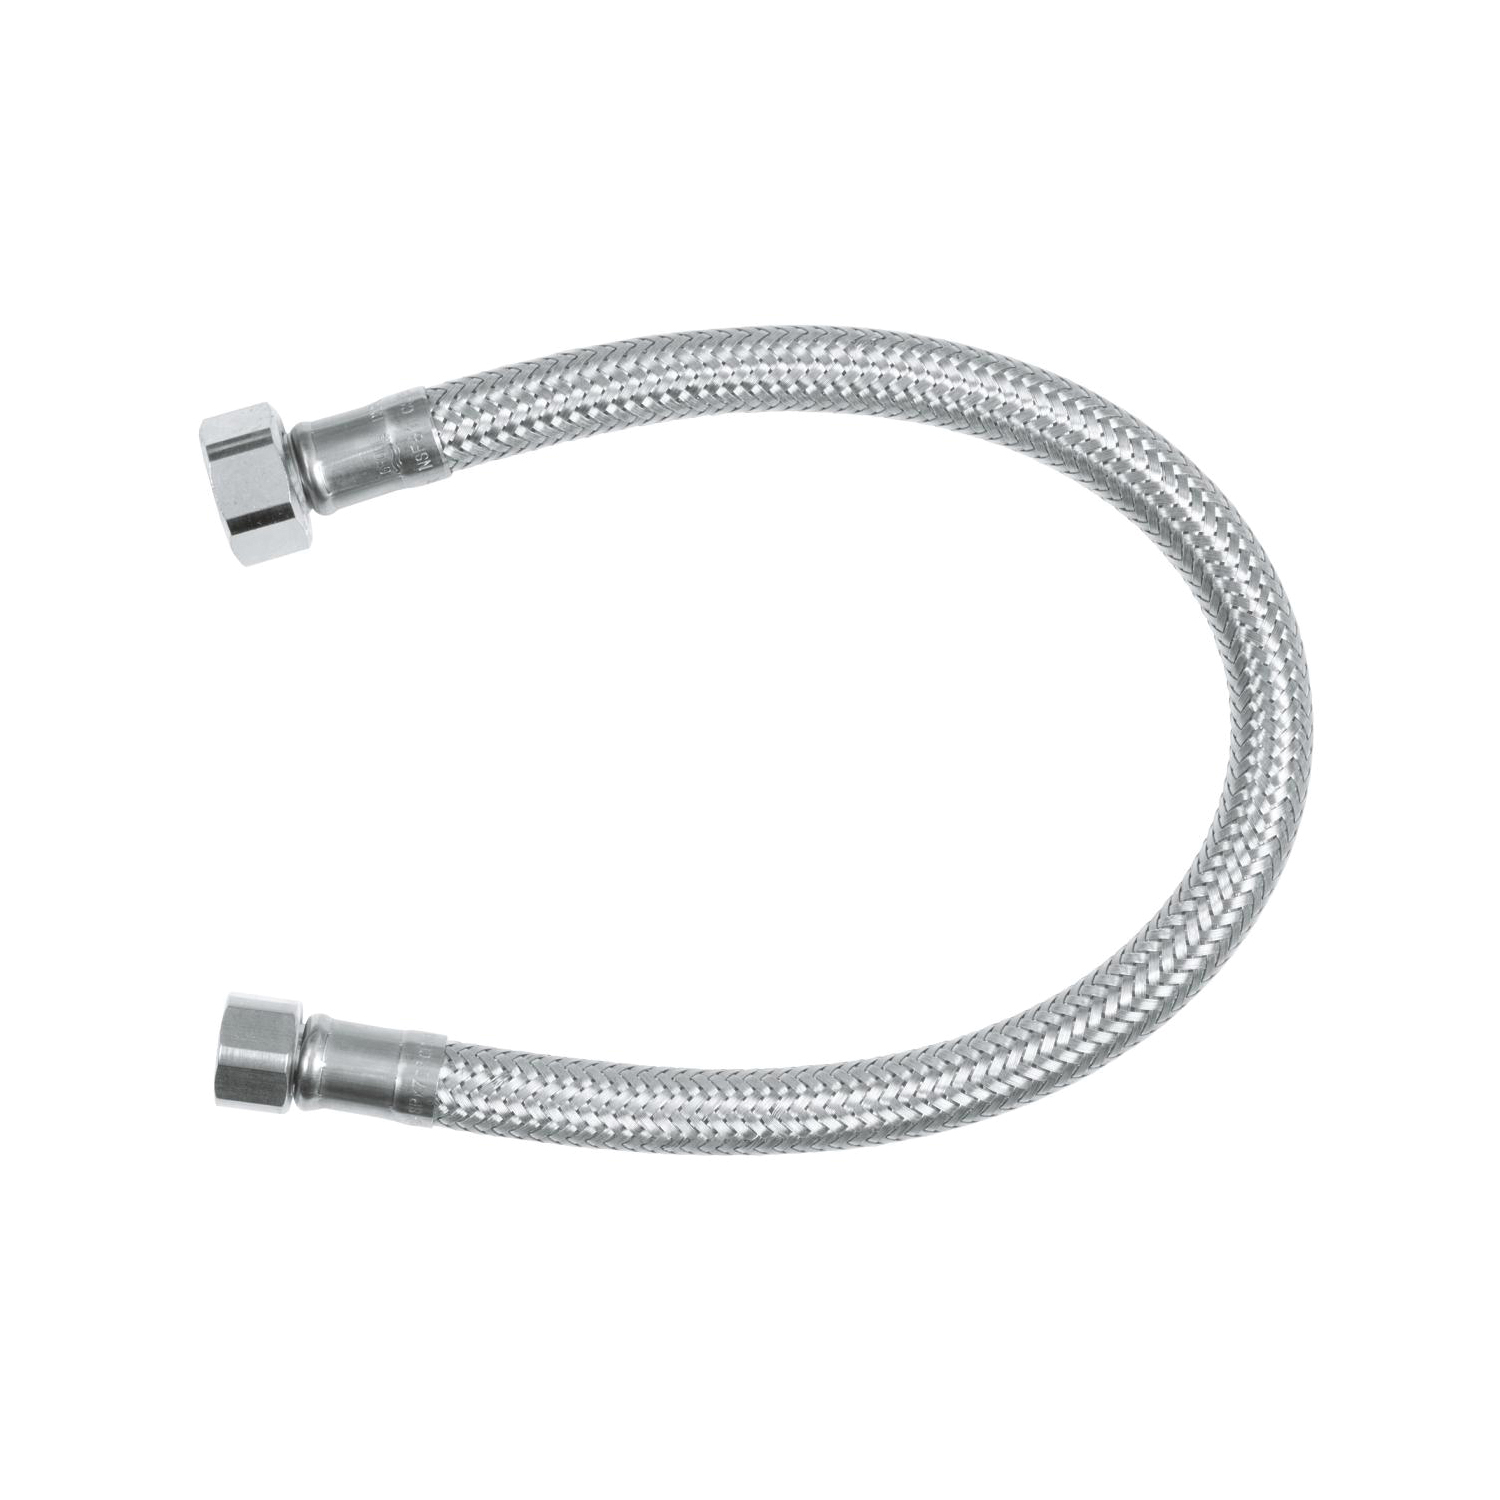 GROHE 45442000 Flexible Hose, For Use With Wideset Lavatory Faucet, Import